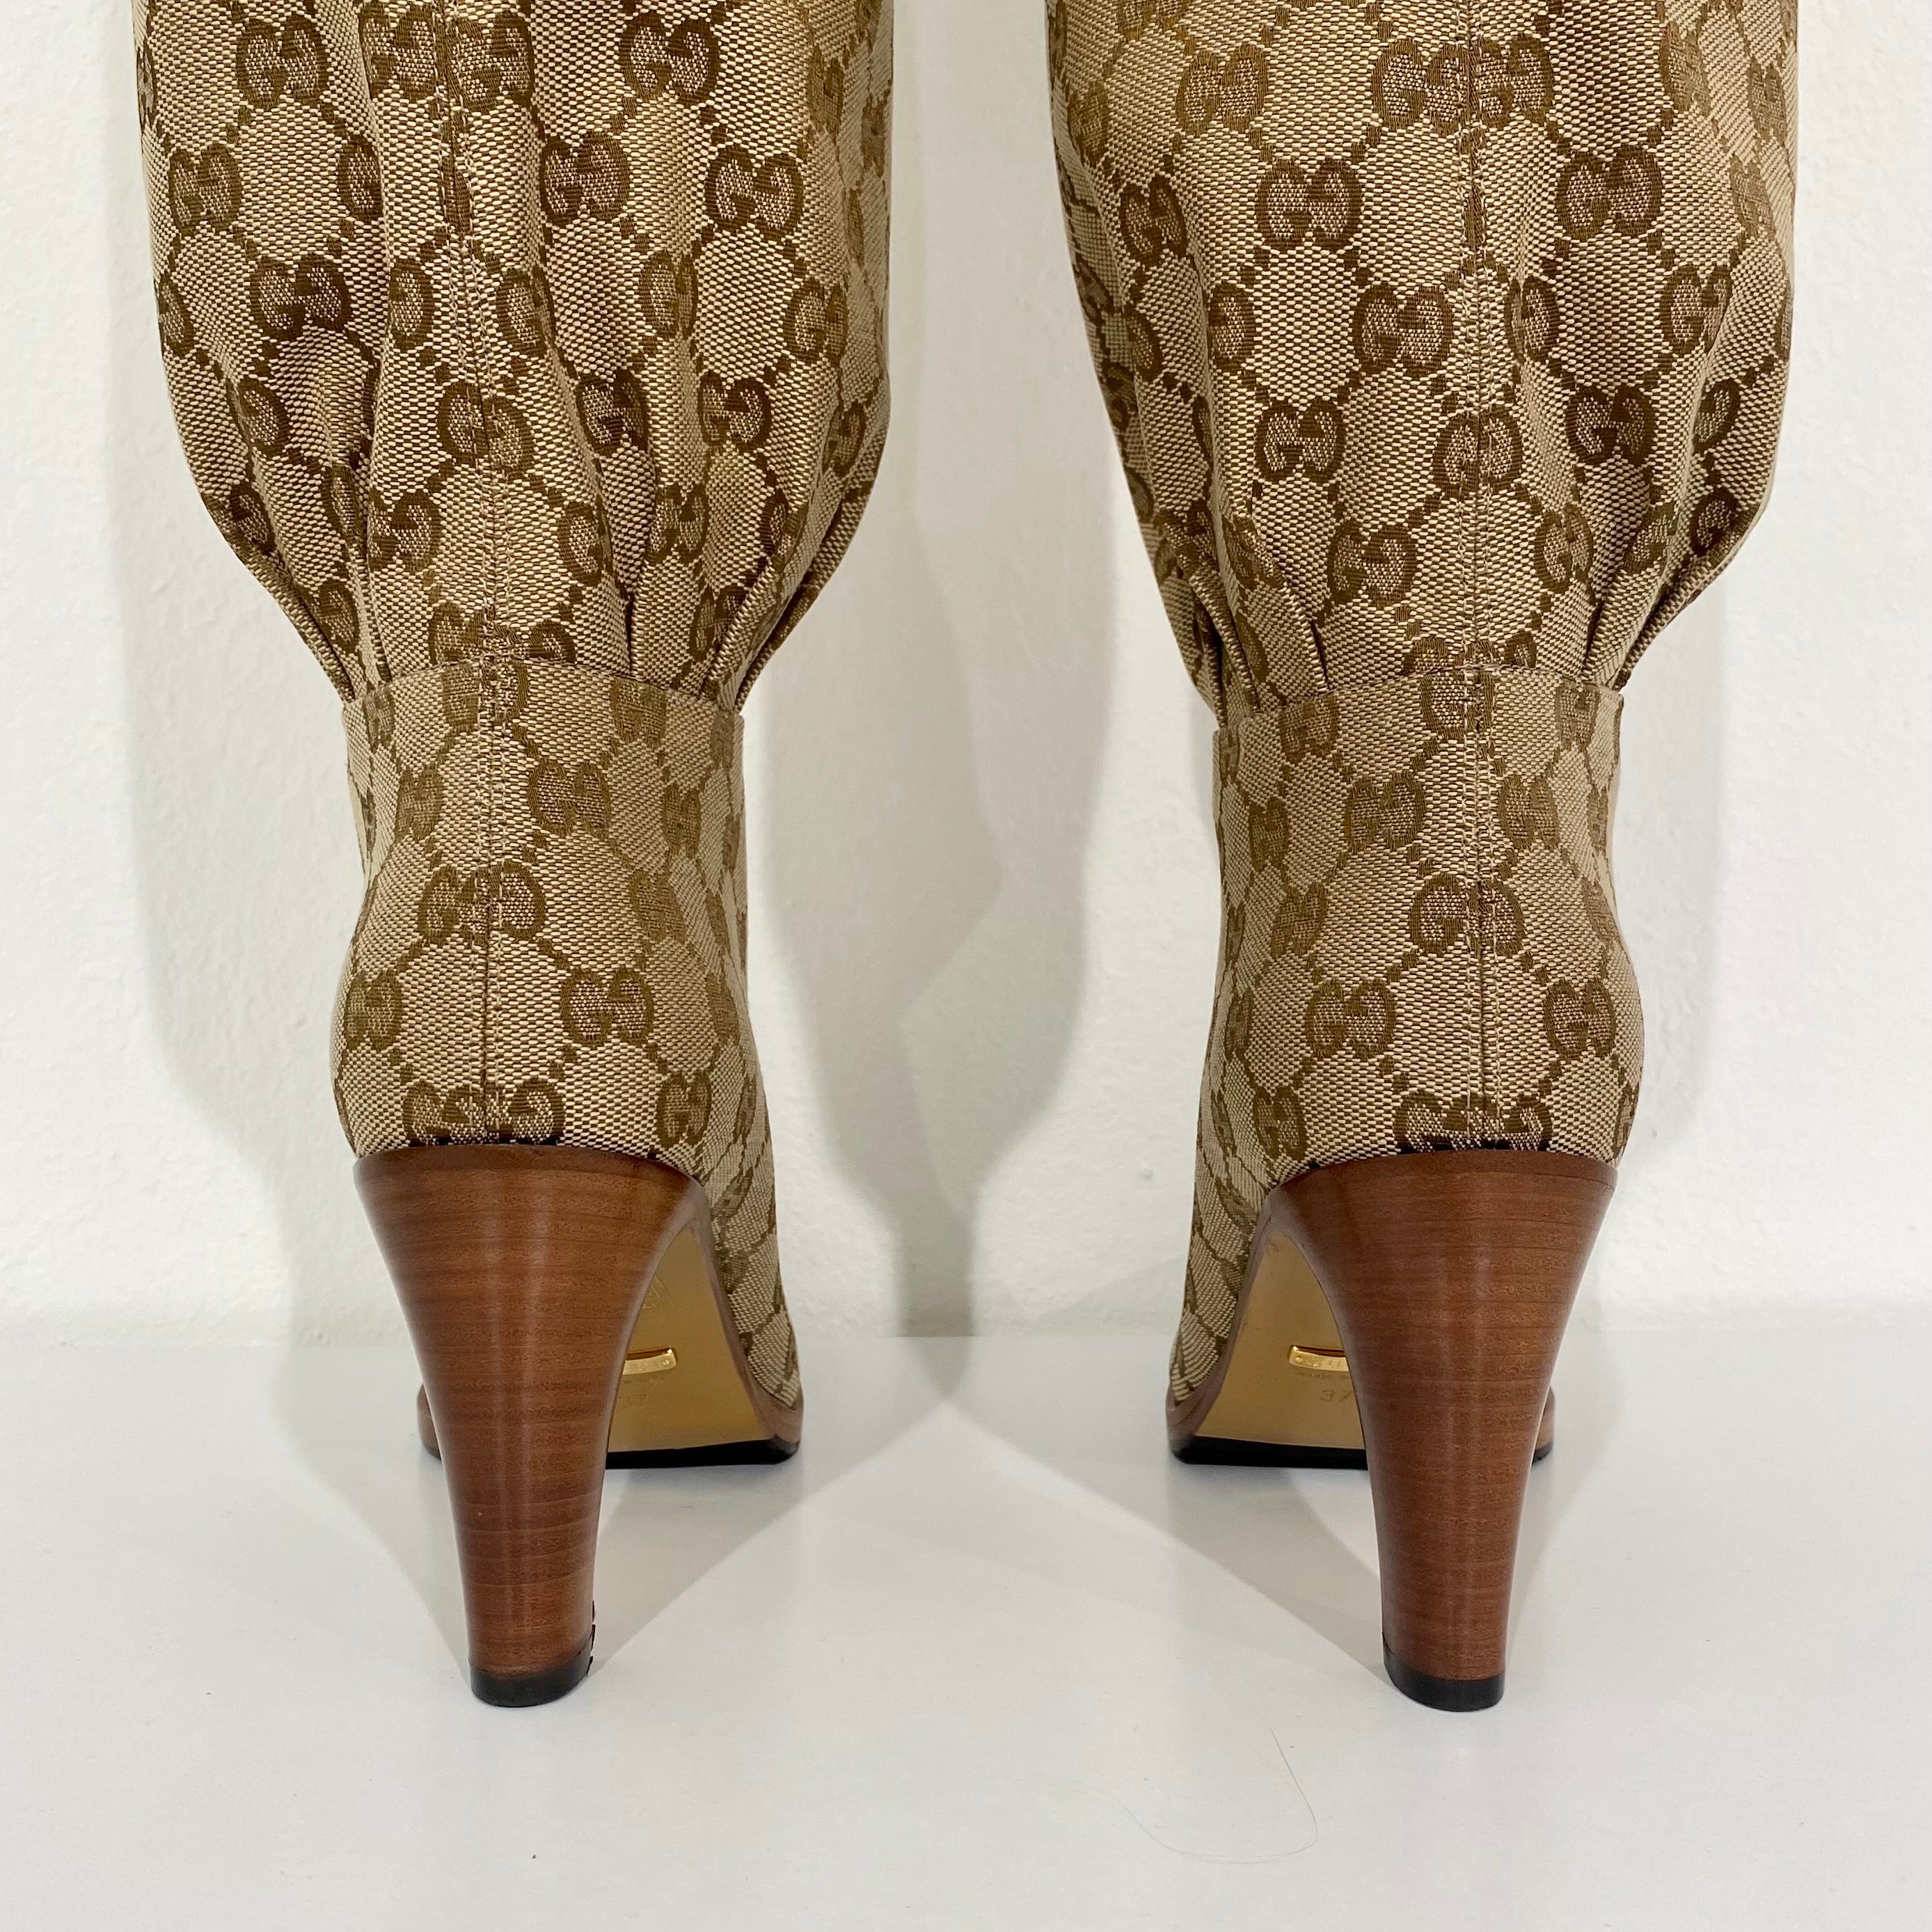 Gucci Monogram Over the Knee Boots